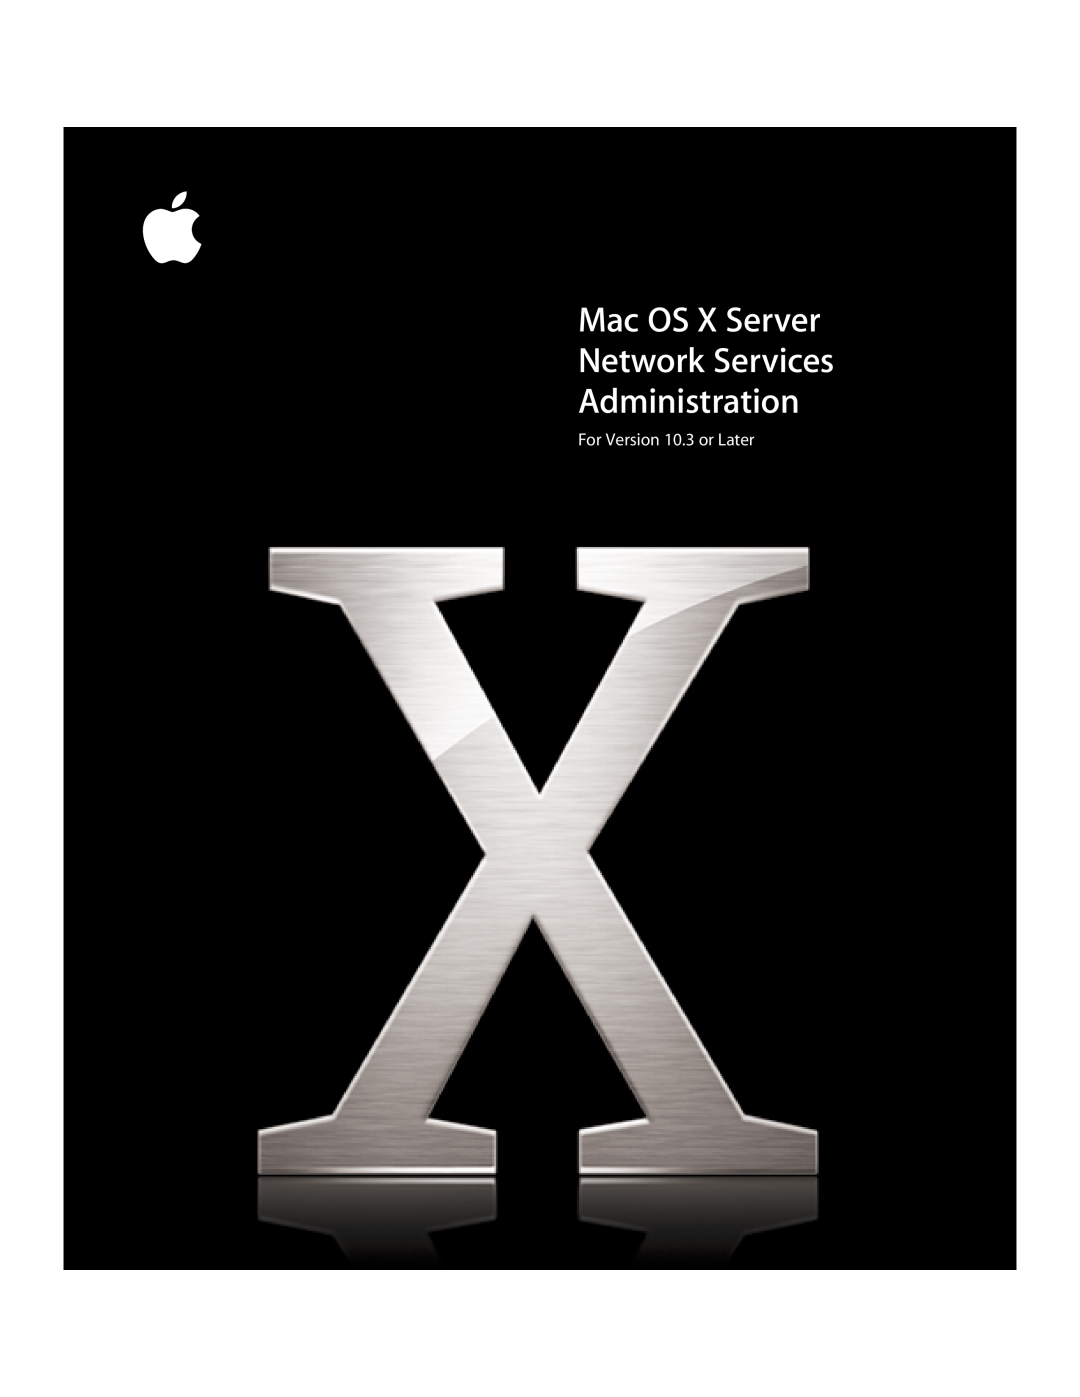 Apple 034-2351_Cvr manual Mac OS X Server Network Services Administration, For Version 10.3 or Later 